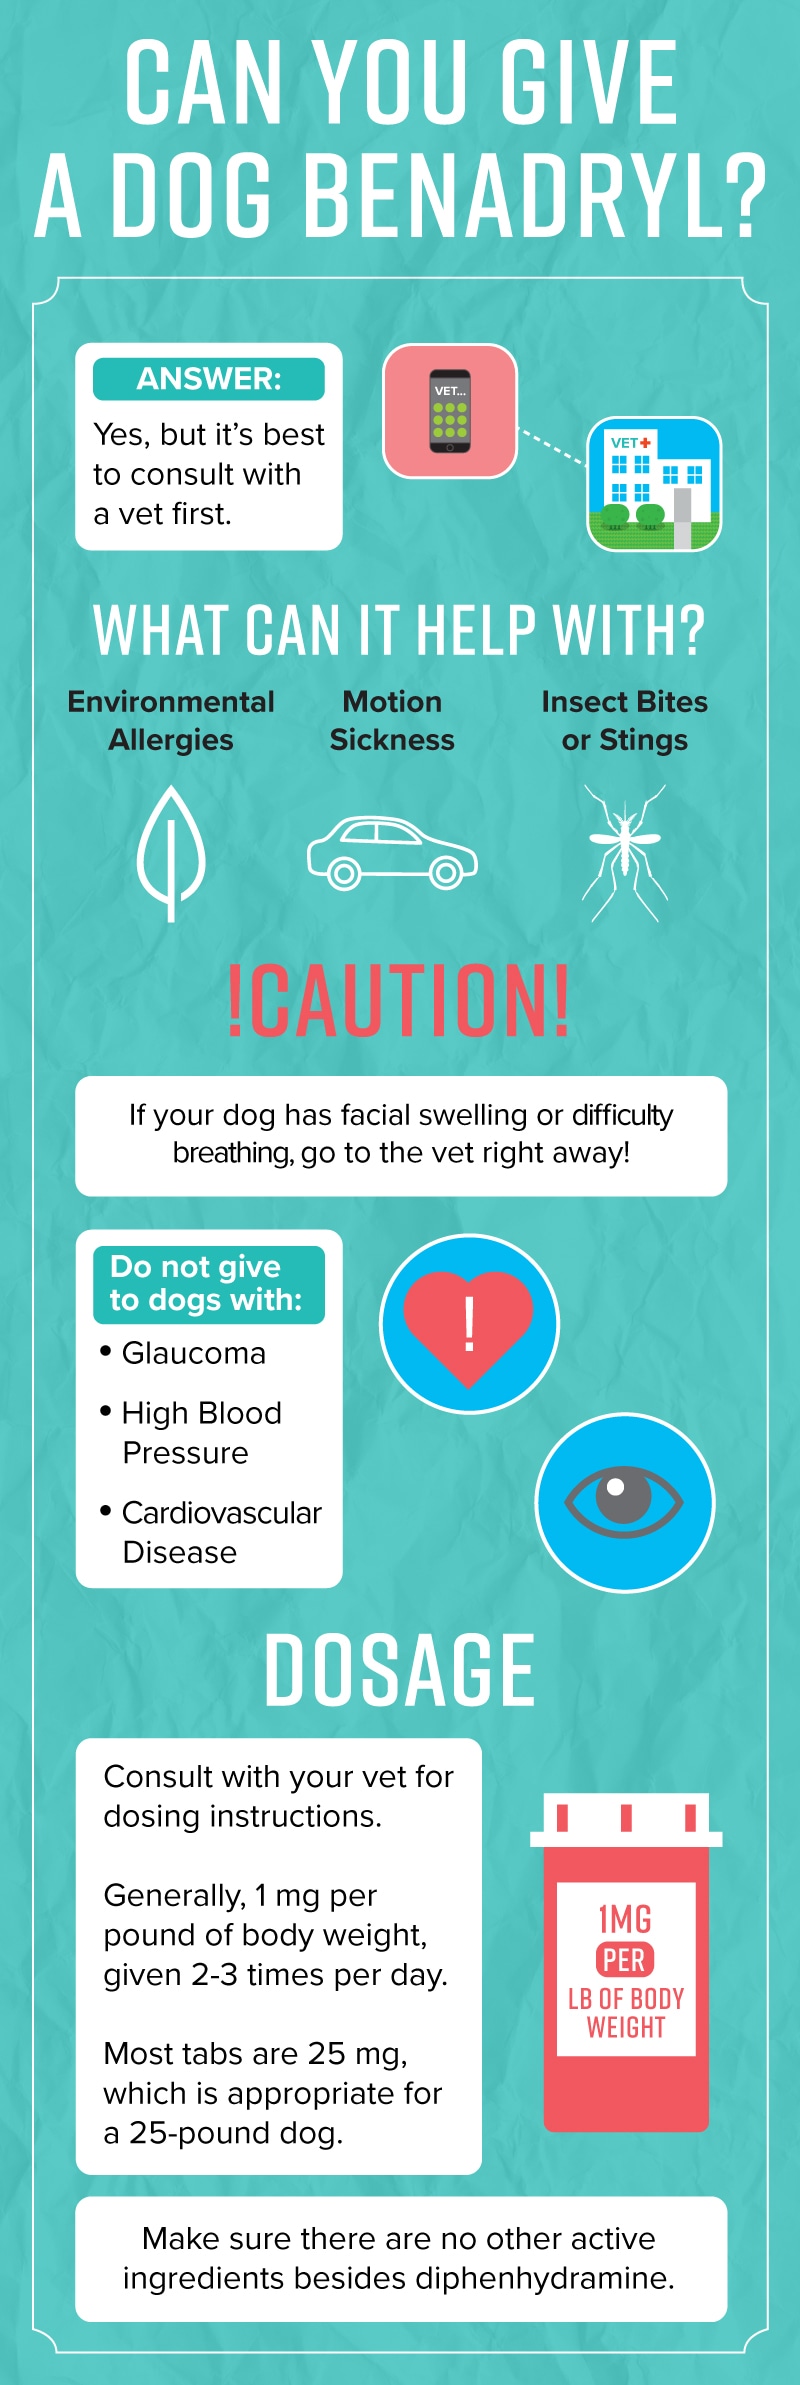 can you give a dog benadryl? | petmd